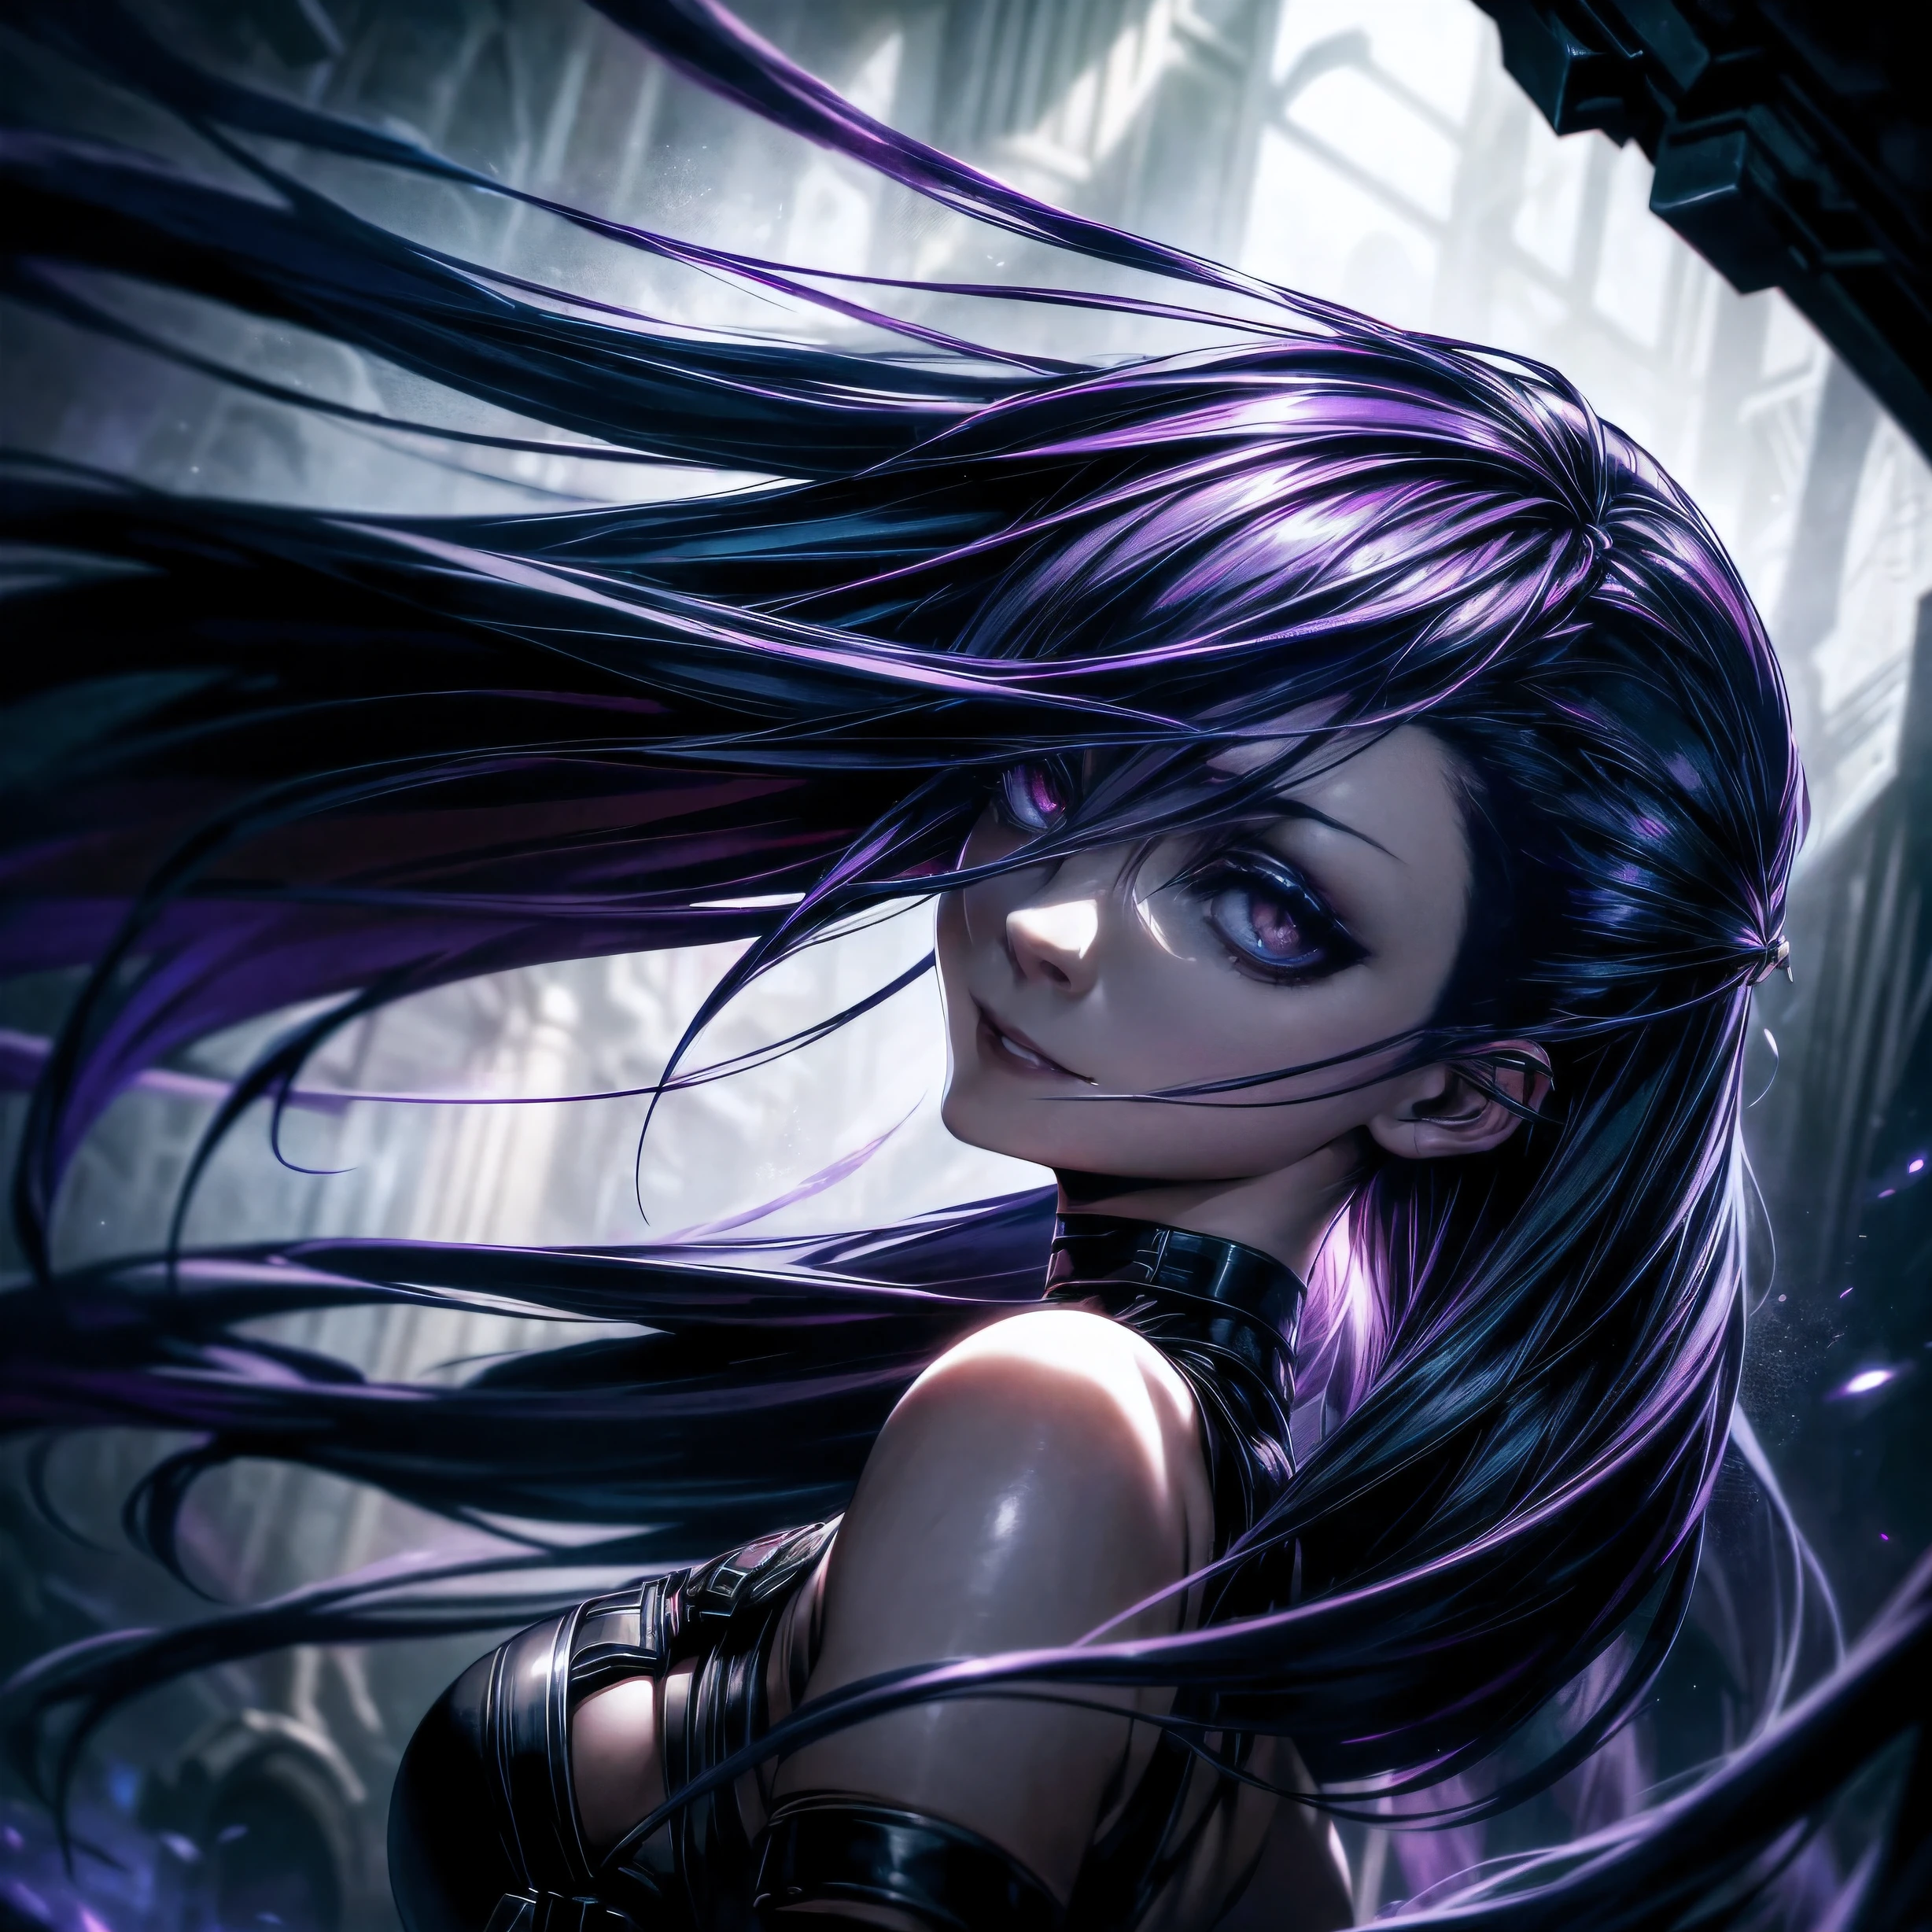 Um ultra-detalhado, high resolution, e realista:1.37 aviso, depicting a mysterious scene inspired by League of Legends champion Jinx. The central focus of the image is a character with his head tilted, olhando para cima com um sorriso estranho. The character&#39;s eyes are exceptionally detailed, radiating a sense of mystery and intensity. The lips are also beautifully detailed, presenting a seductive expression, mas sinistra. The overall atmosphere is dark and mysterious, with shadows and low lighting increasing the mysterious atmosphere. Image quality is top-notch, With intricate detail and sharp focus. O estilo de arte inclina-se para a arte conceitual, misturando elementos de fantasia com um toque de realismo. The color palette is predominantly dark and moody, with vibrant pops of color used to highlight specific areas. Lighting is positioned to create dramatic effects, casting shadows and lighting the scene with an eerie glow.